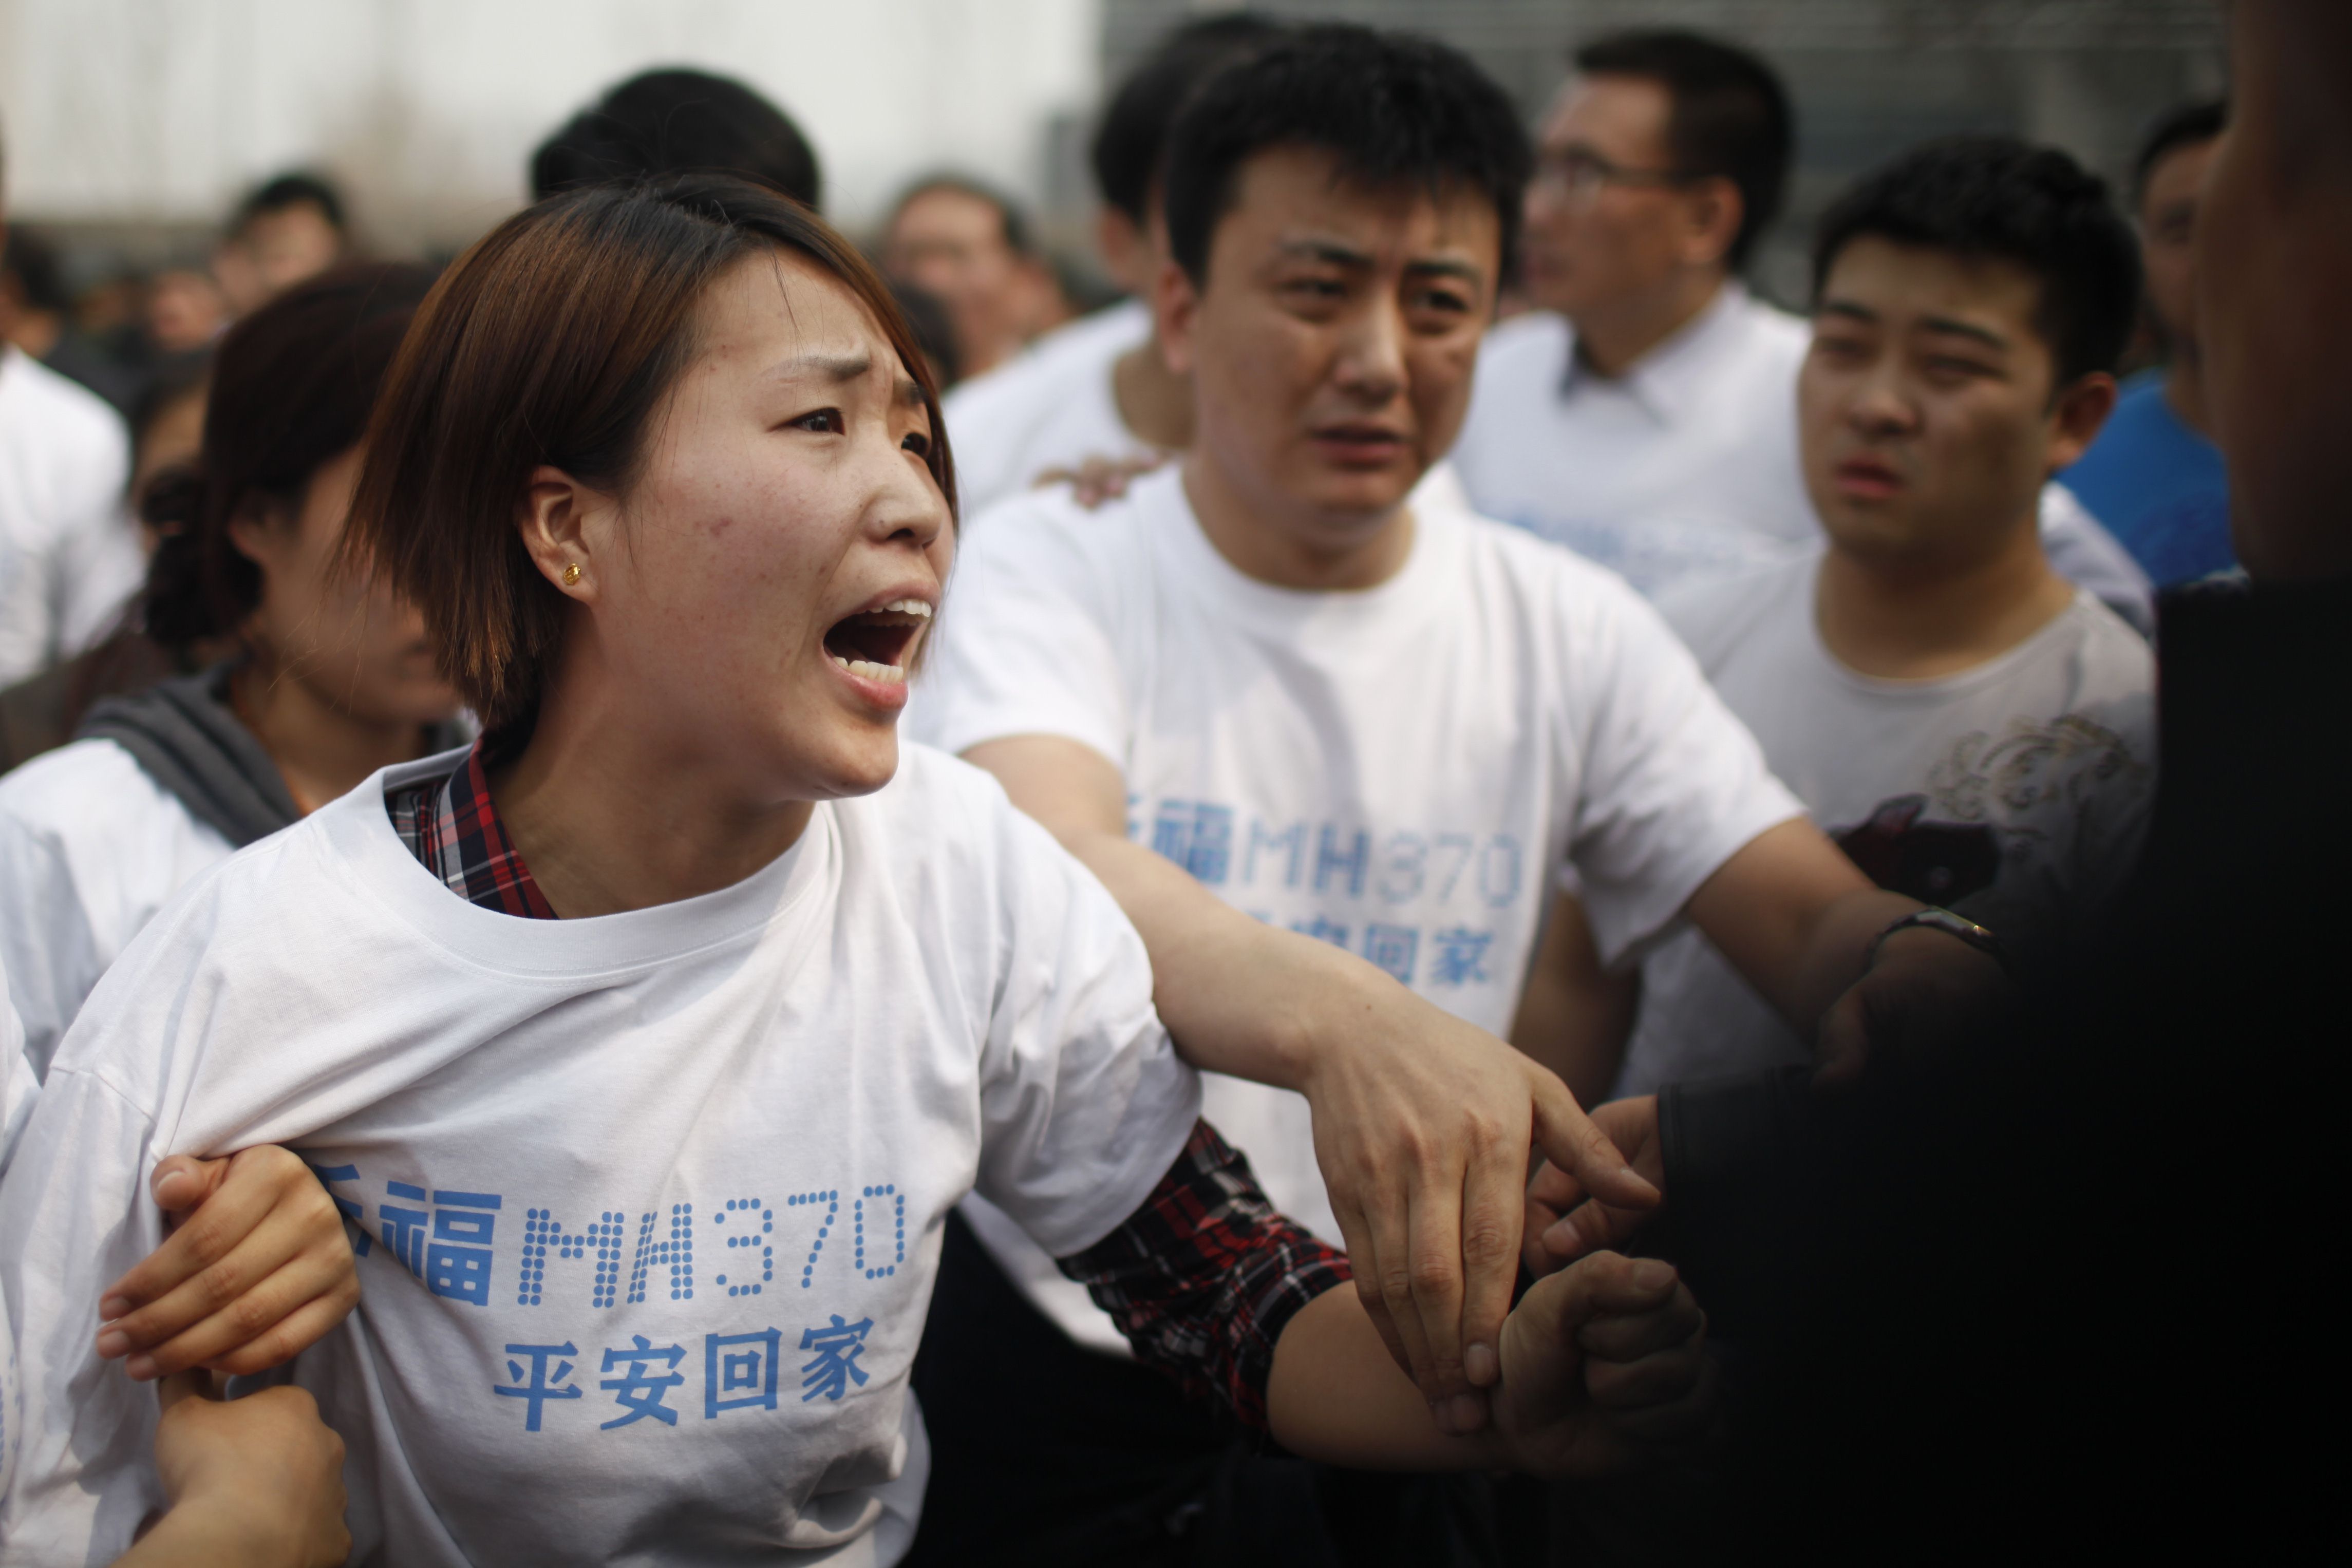 A relative of passengers on missing Malaysia Airlines flight MH370 yells at a security personnel during  a protest outside the Malaysian embassy in Beijing on Tuesday.